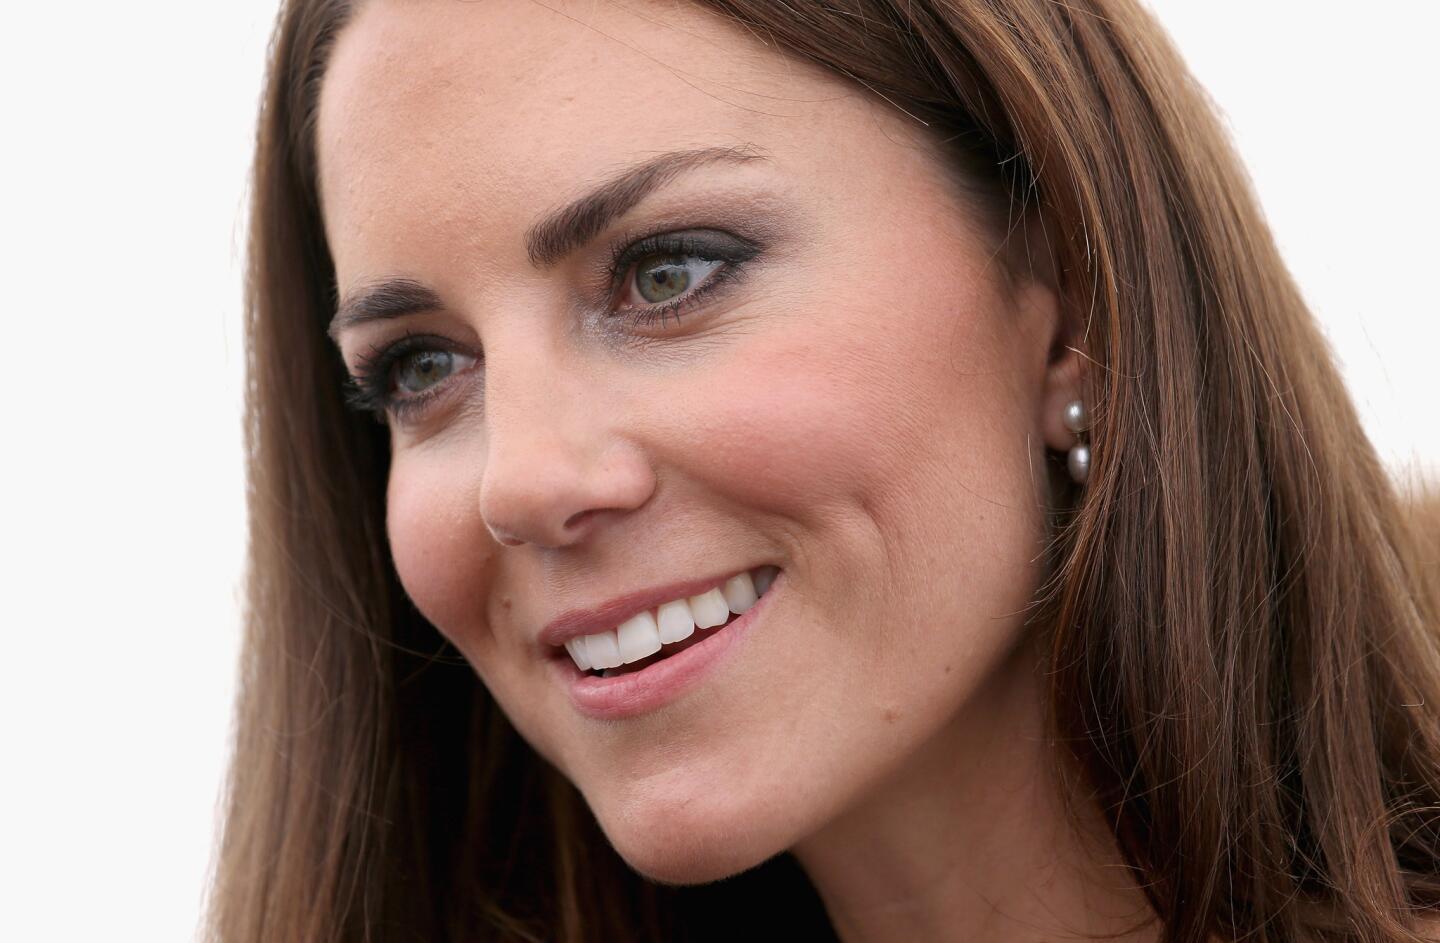 Prince William first met Kate Middleton at the University of St. Andrews in Scotland. As the story goes, they were friends first until a 2002 charity fashion show where Kate walked the runway in a partially see-through dress.